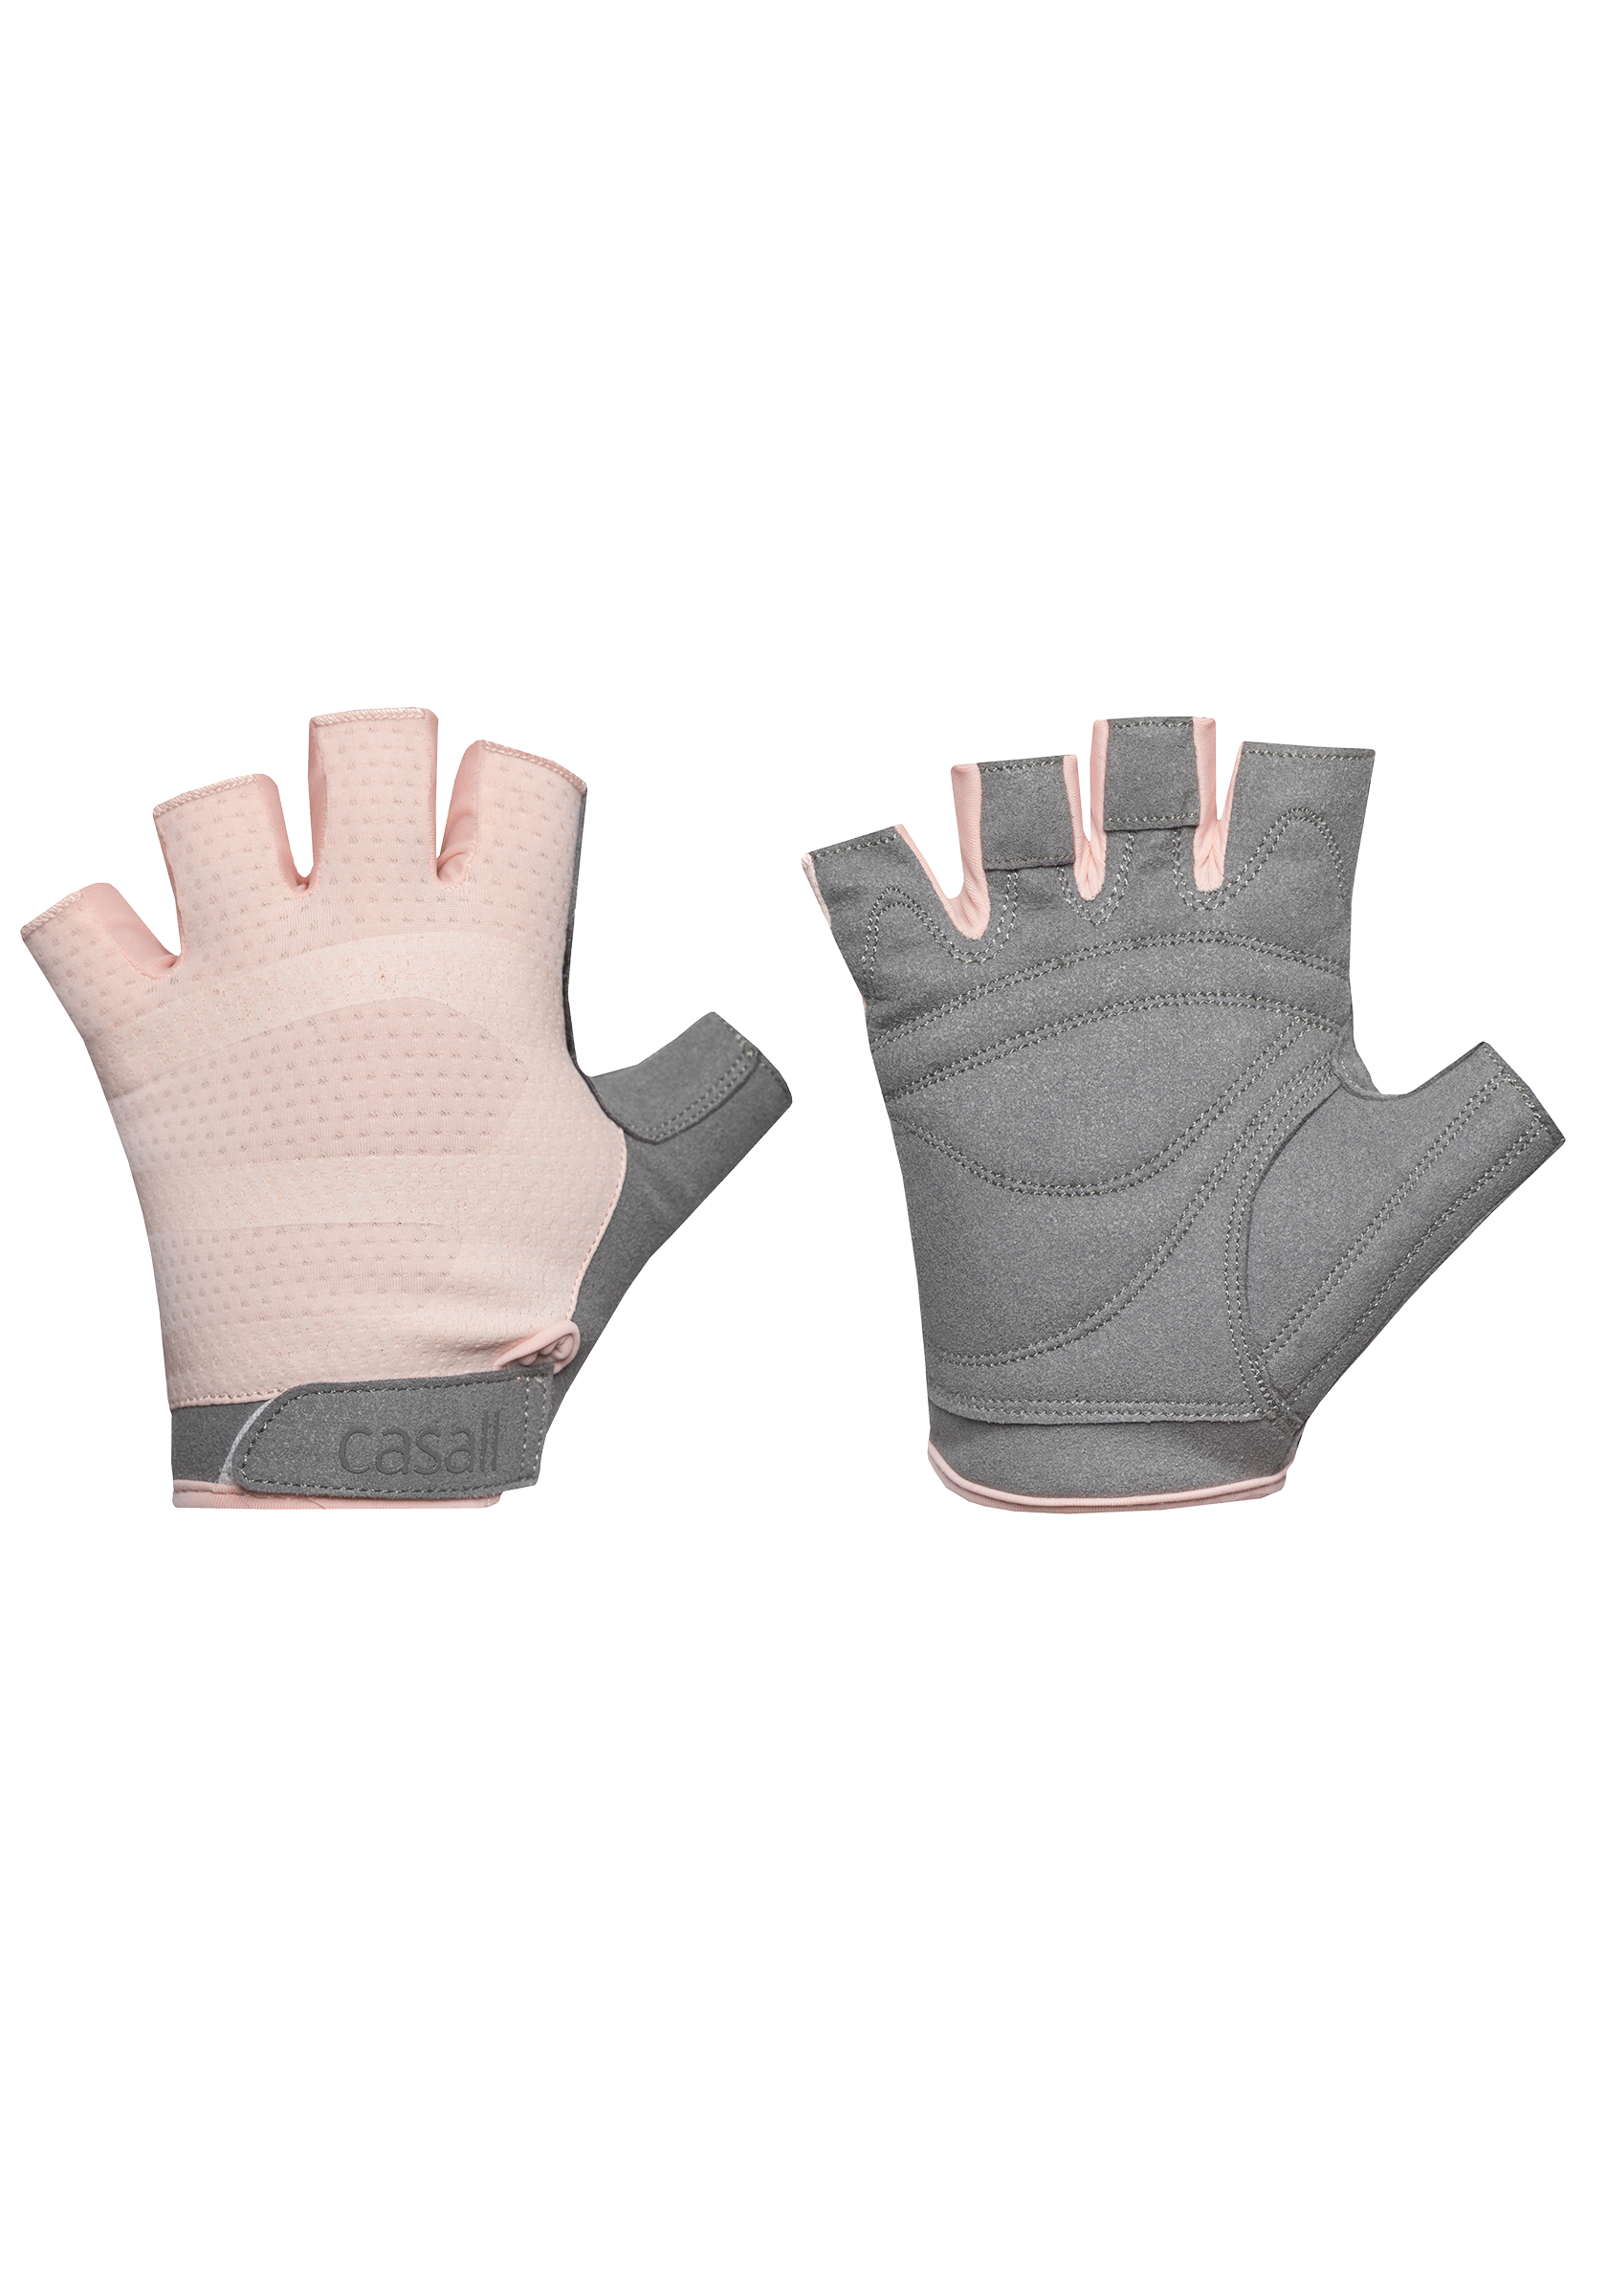 Exercise glove wmns - Lucky pink/grey